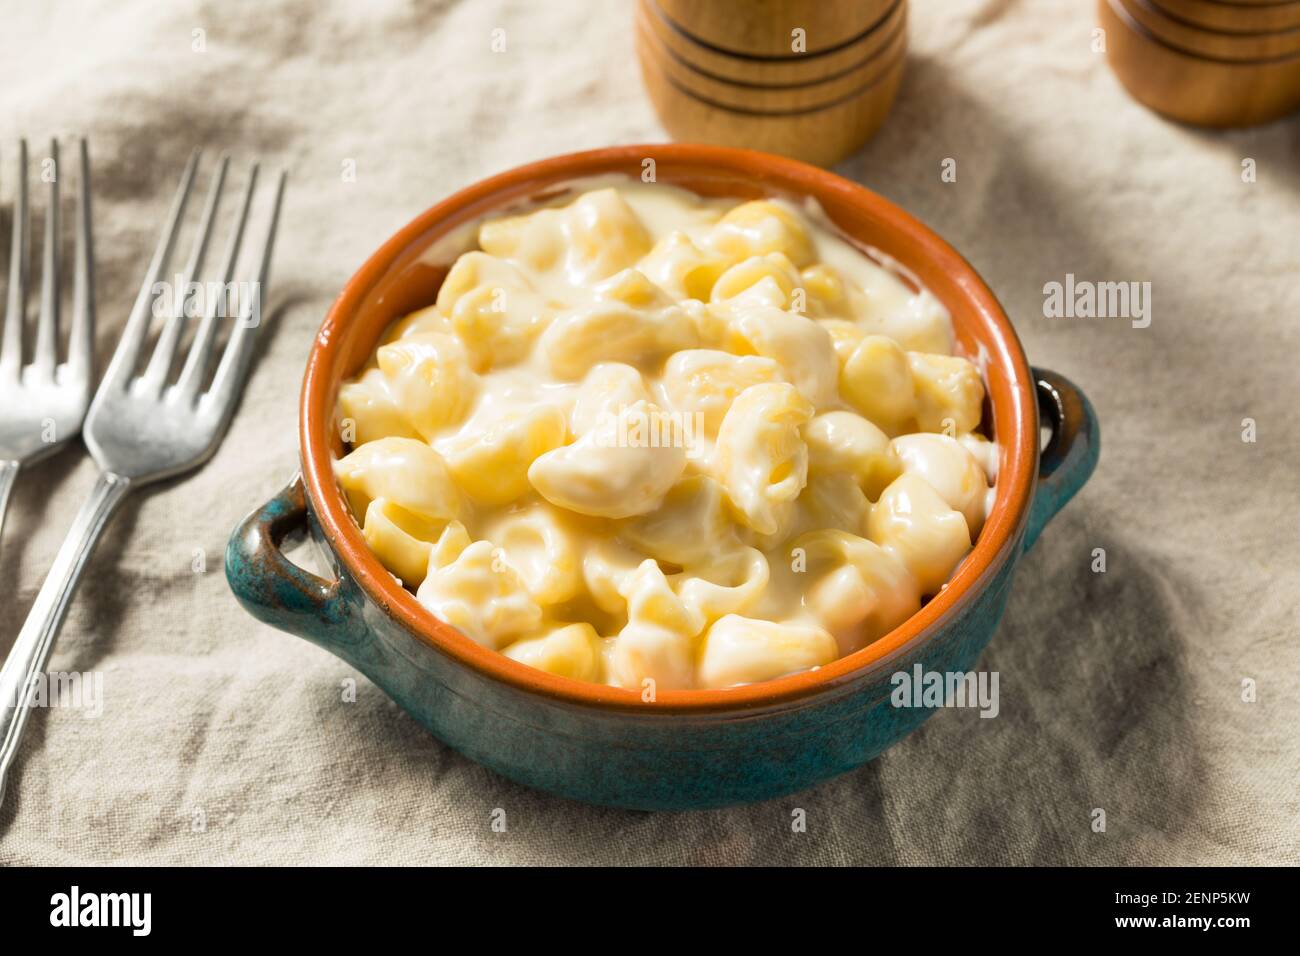 Healthy Homemade White Macaroni and Cheese in a Bowl Stock Photo